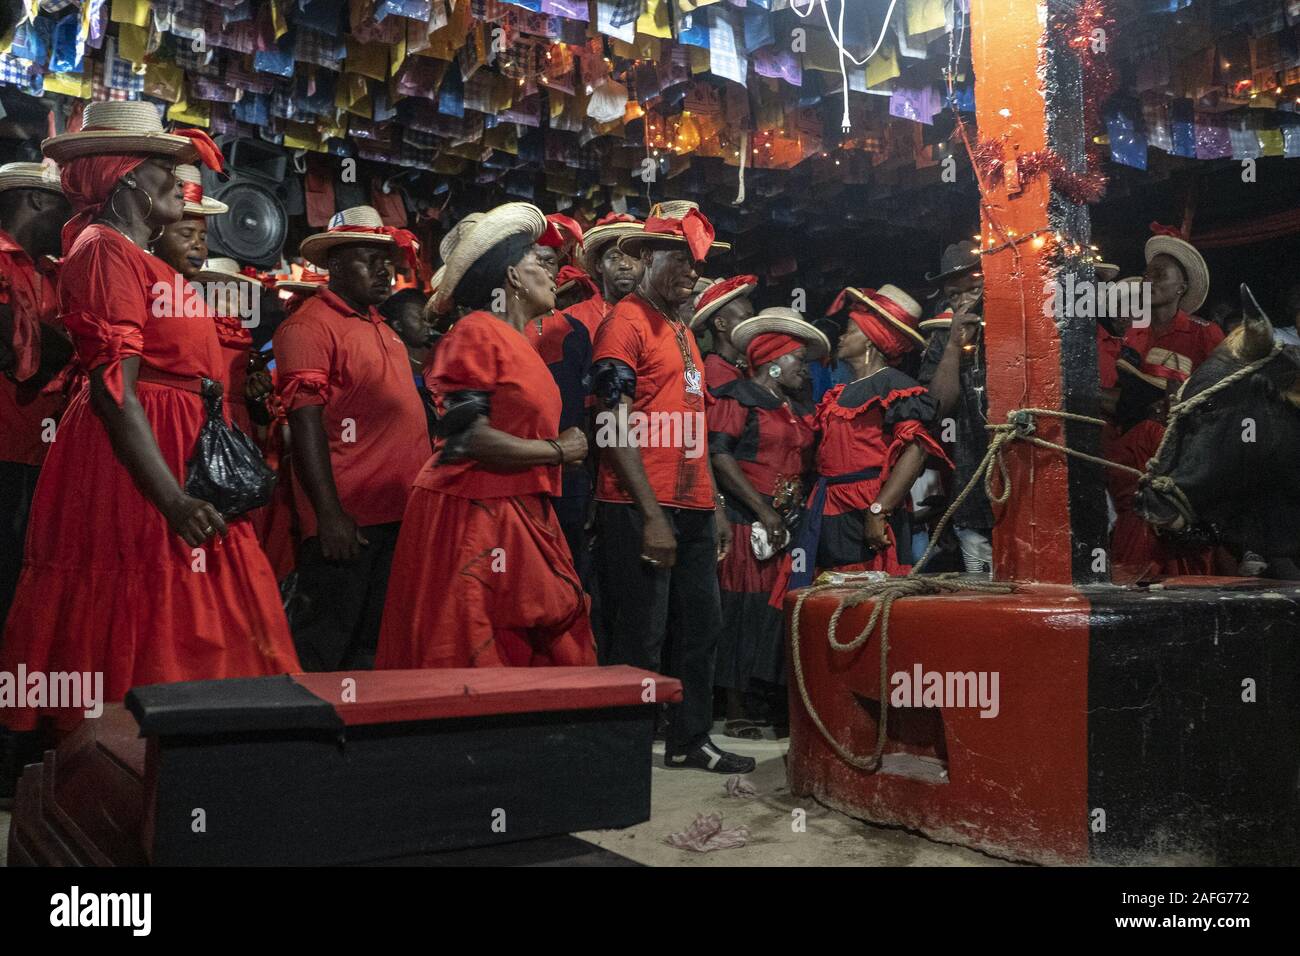 Jacmel, Haiti. 12th Dec, 2019. As the ceremony progresses a bull and coffin believed to be a conduit for the spirits are brought in the Peristil and the bull is tied to the altar.The saying goes Haiti is 70% Catholic, 30% Protestant and 100% Percent Voodoo. Voodoo ceremonies are used to call the presence of spirits or Loa to the physical world. Though its exact number of devotees on the island nation is unclear its presence is undeniable. The sacrifice of a bull is believed to be a great offering to the spirts and might only be performed once a year by a Voodoo Priest. The blood of the sac Stock Photo